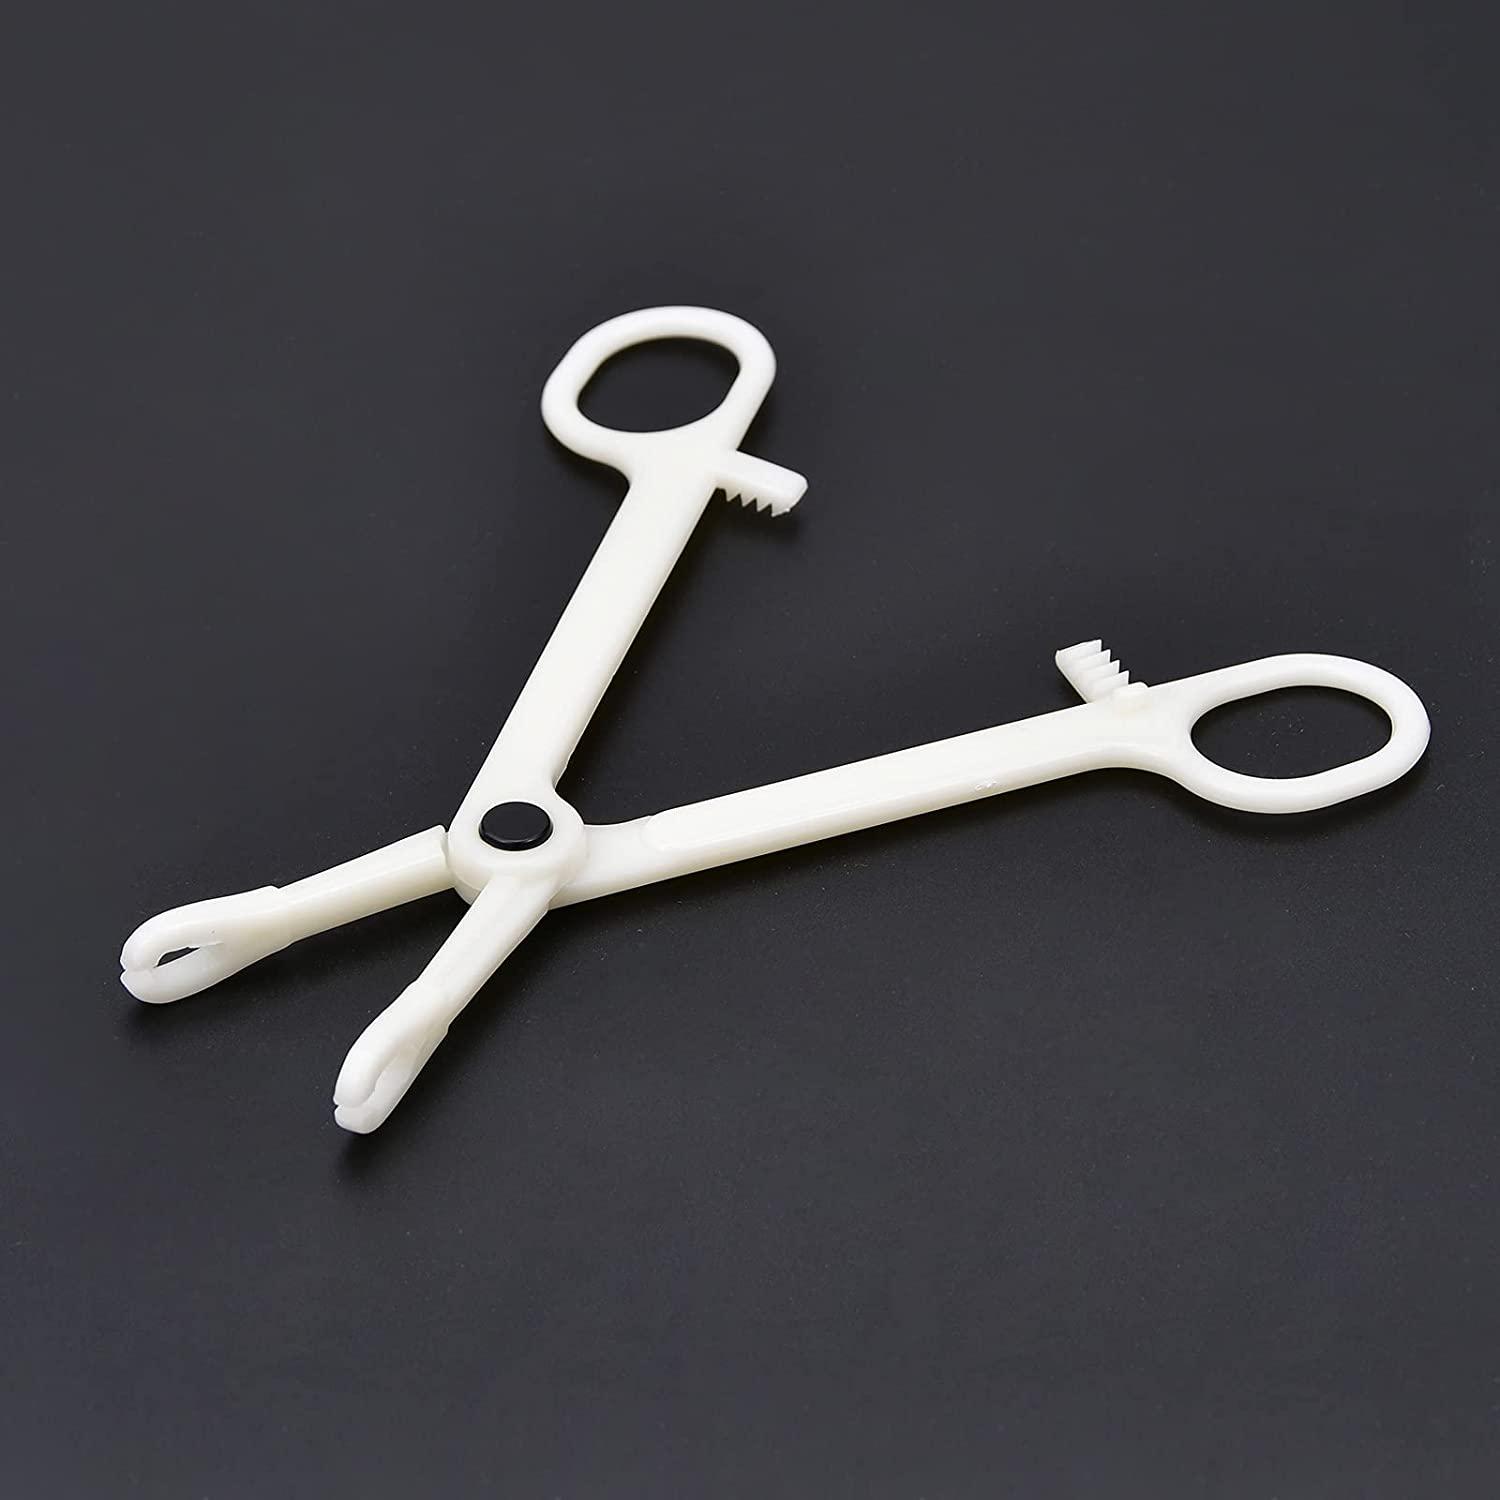 16pcs Belly Button Piercing Kit14g Body Piercing Needles And Disposable Piercing Clamps Set For 